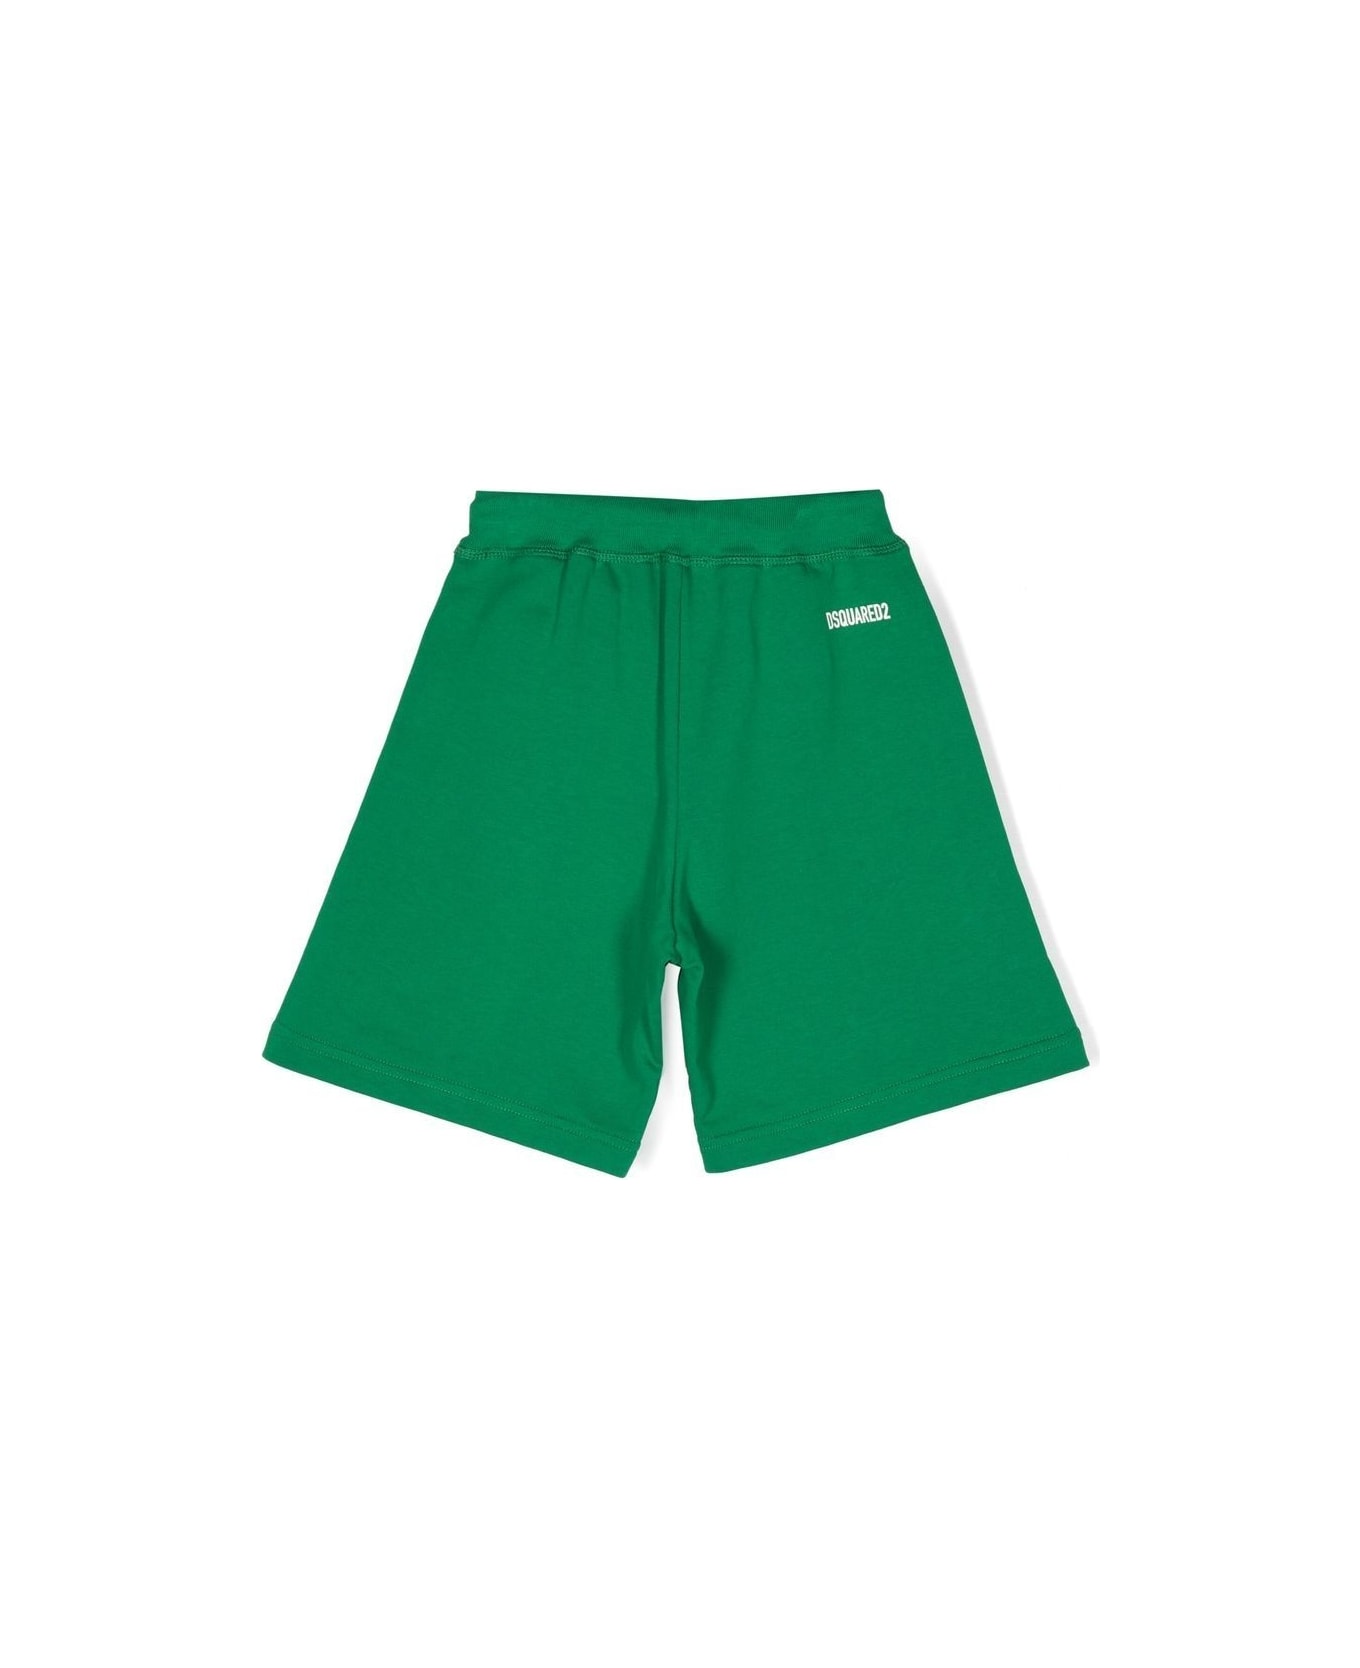 Dsquared2 Sports Bermudas With Print - Green